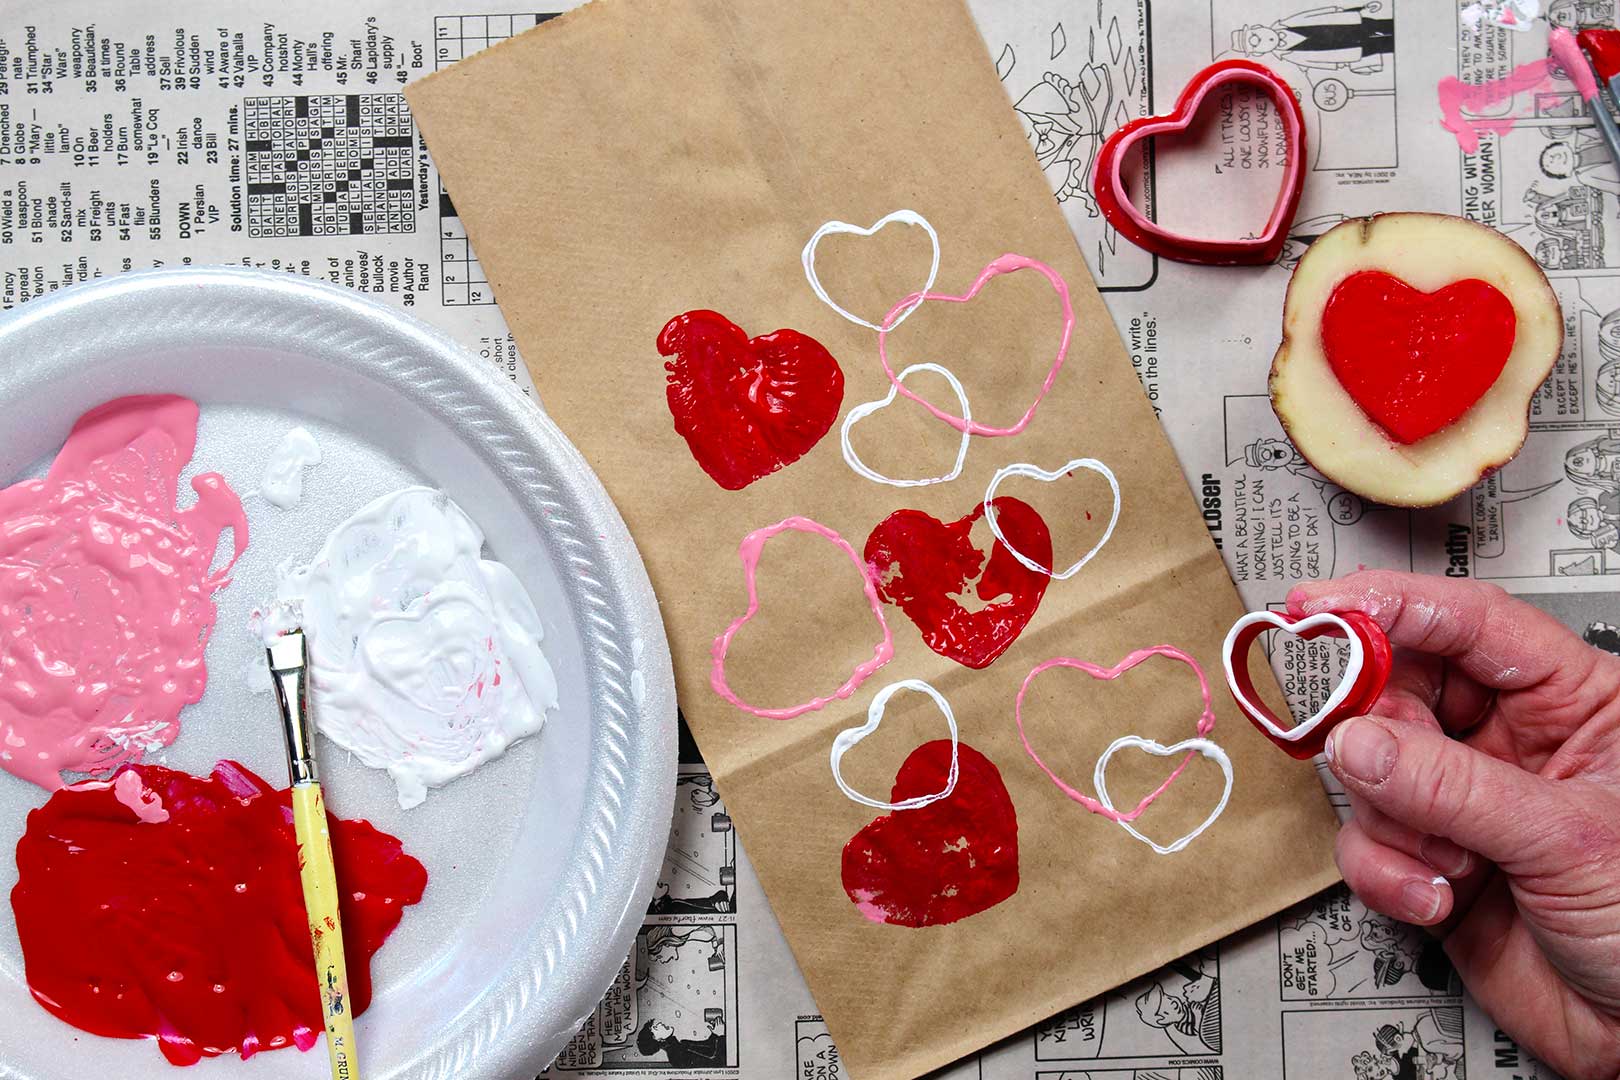 Hand holding red cookie cutter in white paint near brown paper bag with painted heart stamps resting on newsprint.